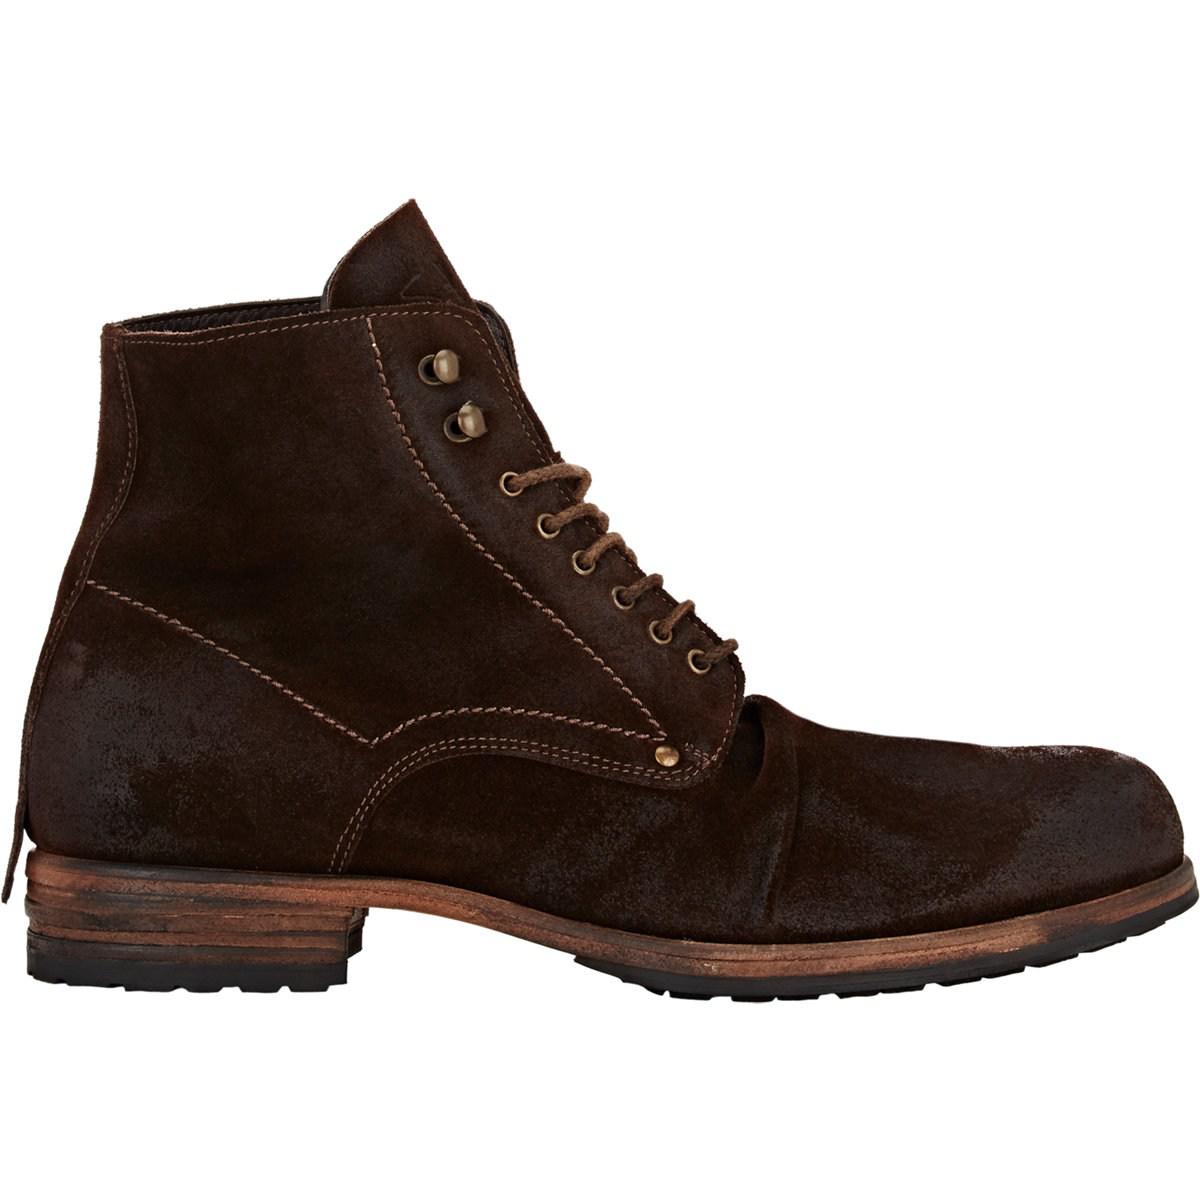 Shoto Suede Wrinkled-vamp Boots in Brown for Men - Lyst